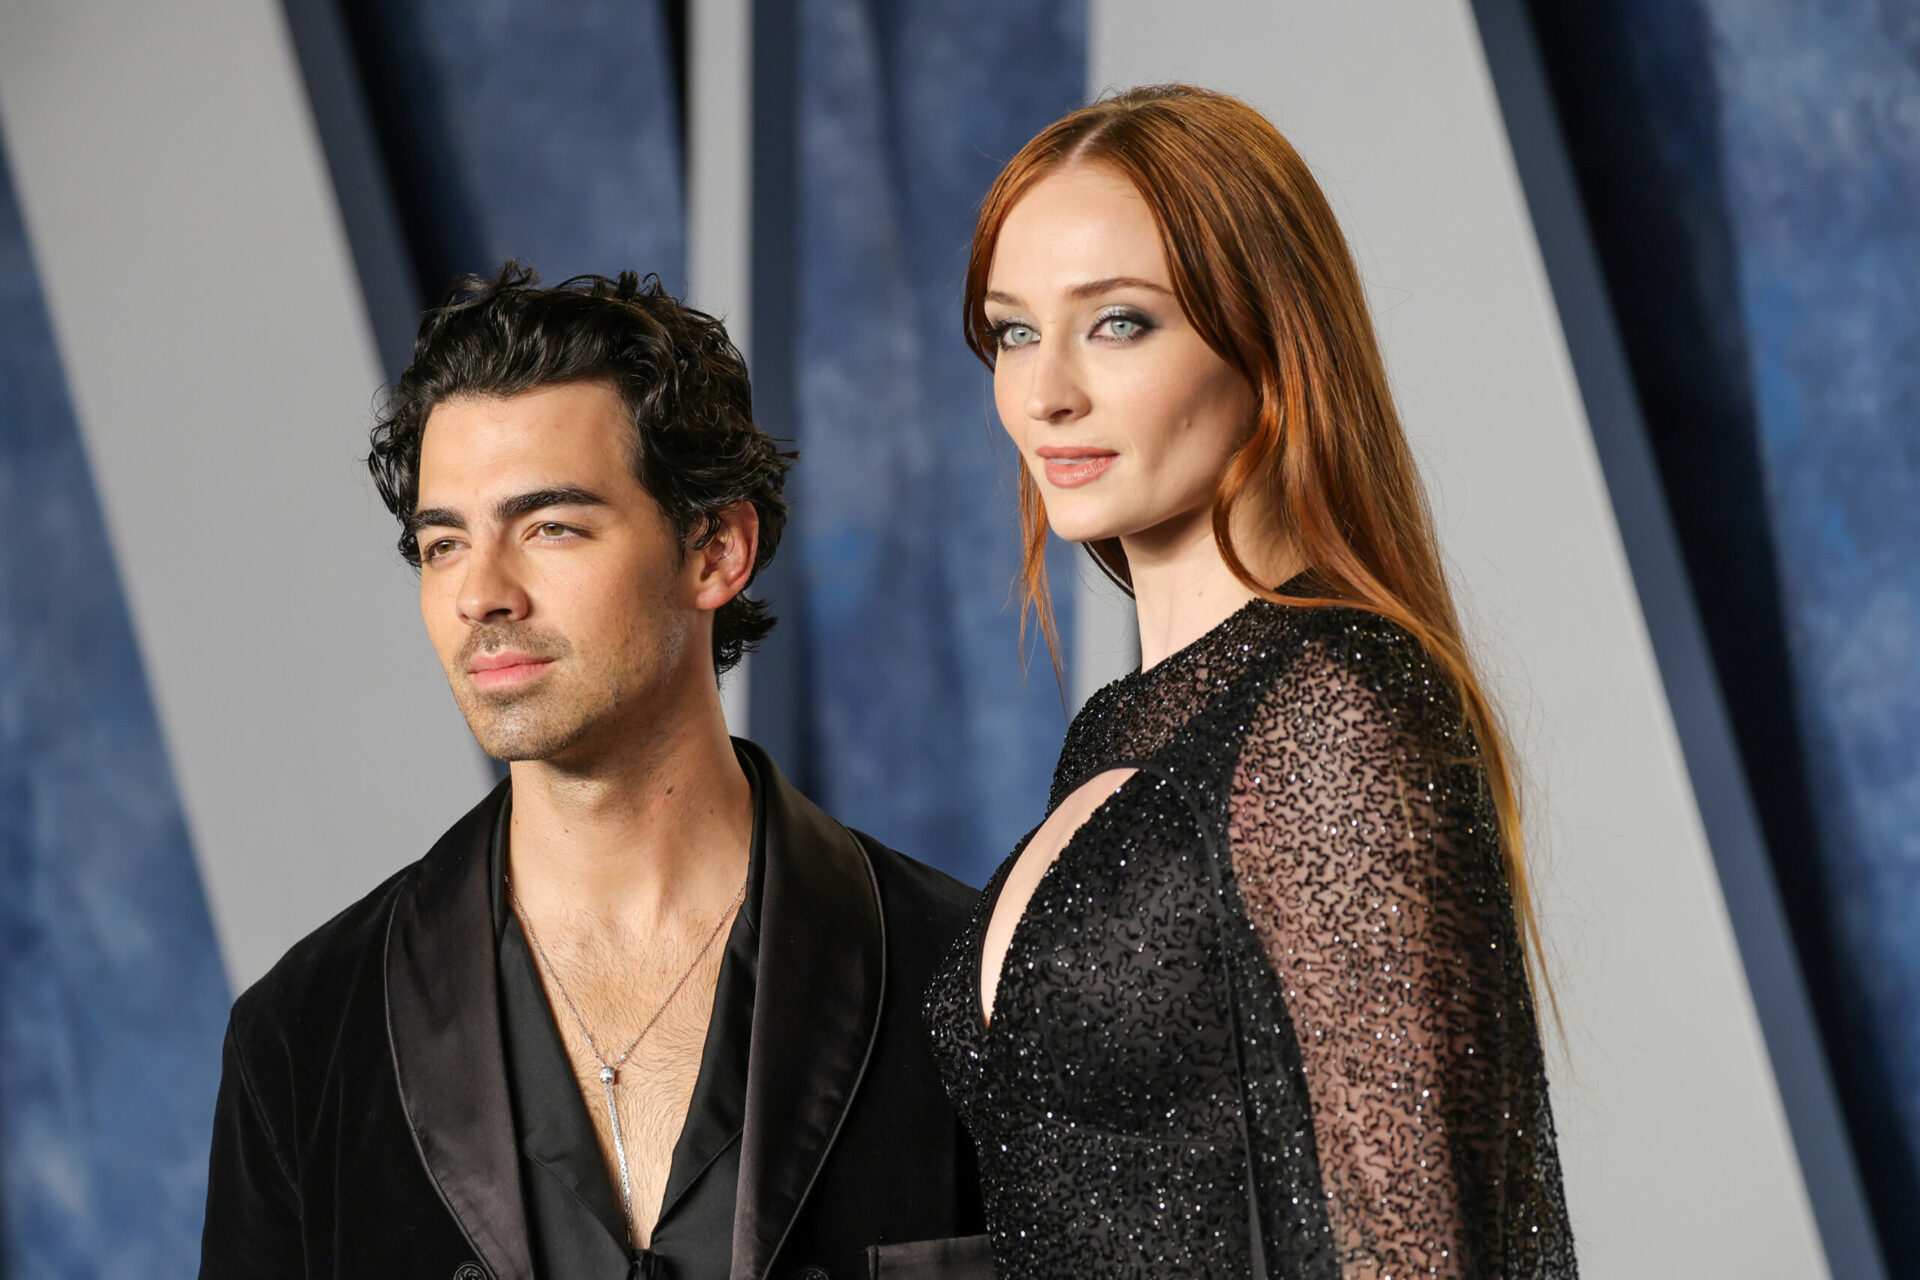 Sophie Turner and Joe Jonas child abduction lawsuit officially dismissed in light of custody agreement